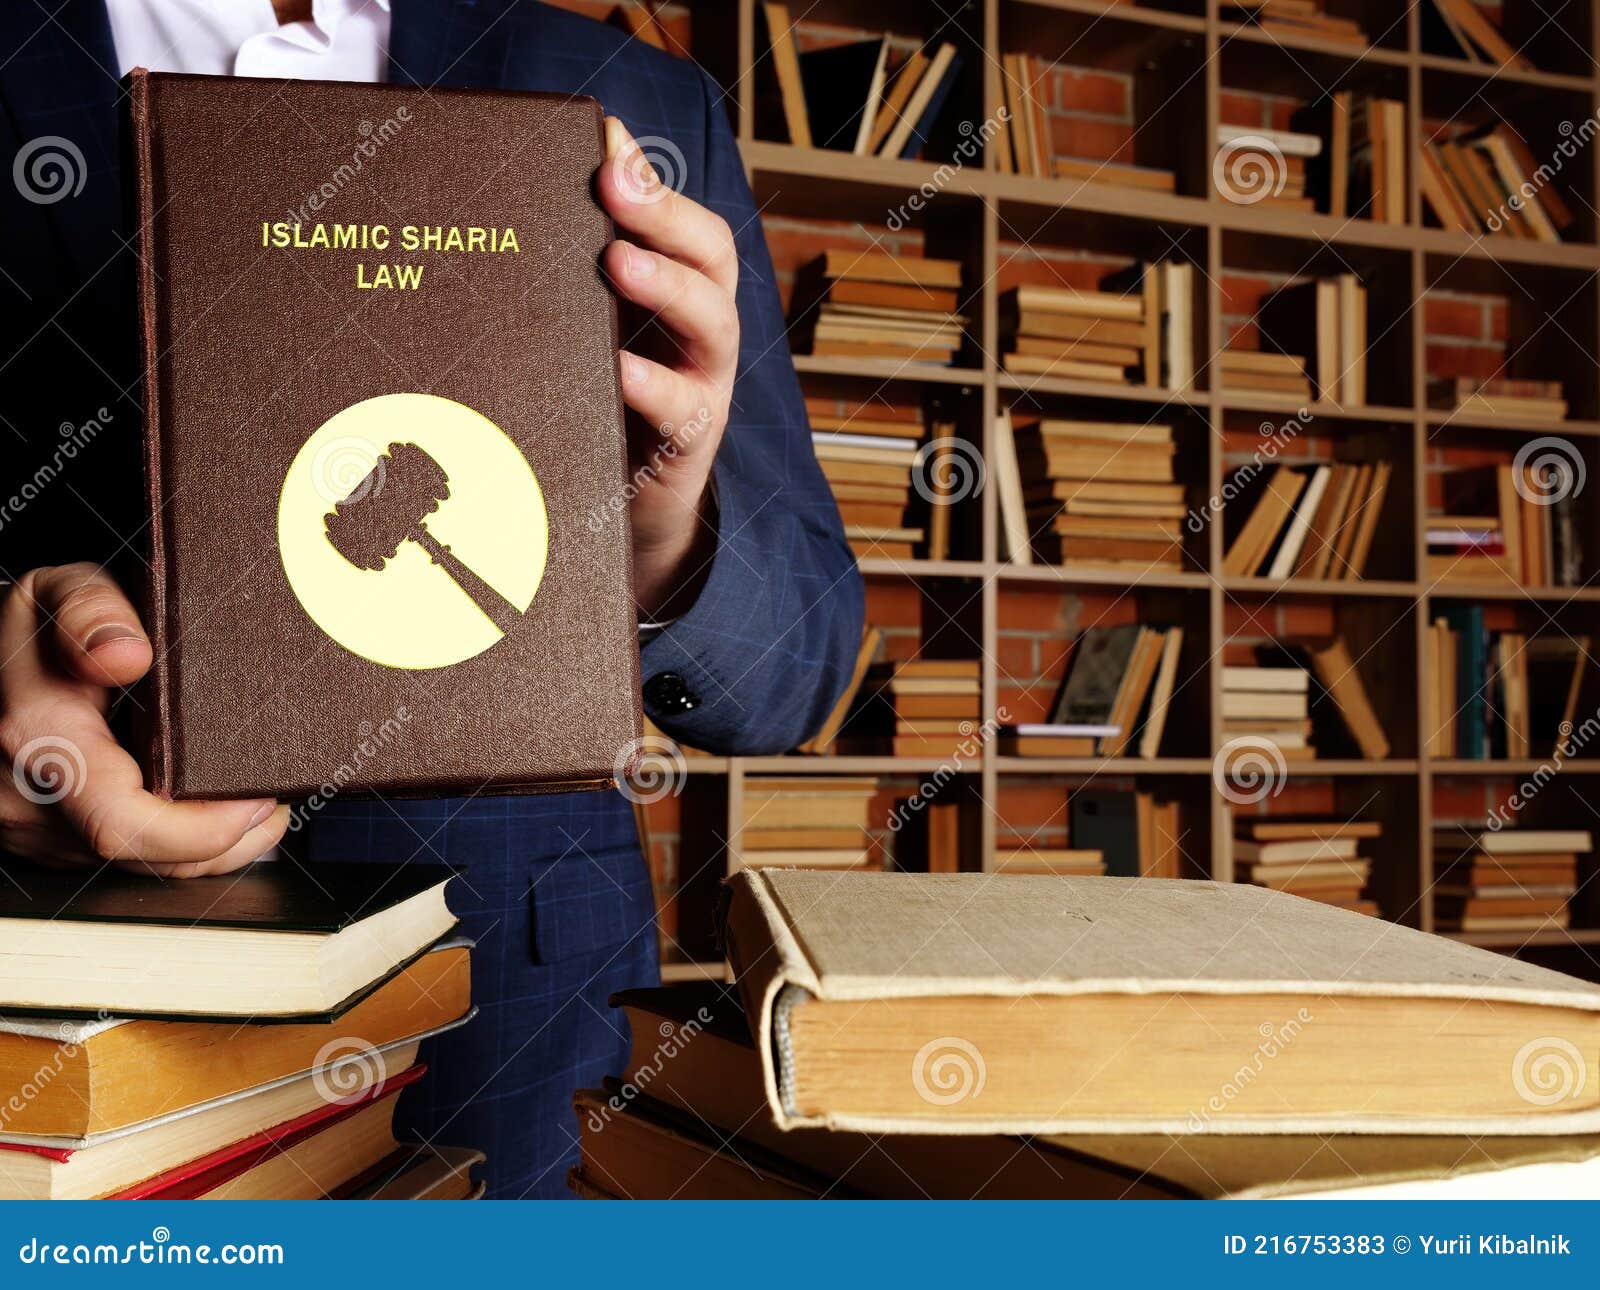 islamic sharia law book in the hands of a jurist. sharia lawÃÂ isÃÂ islam`sÃÂ legal system. it is derived from bothÃÂ theÃÂ koran